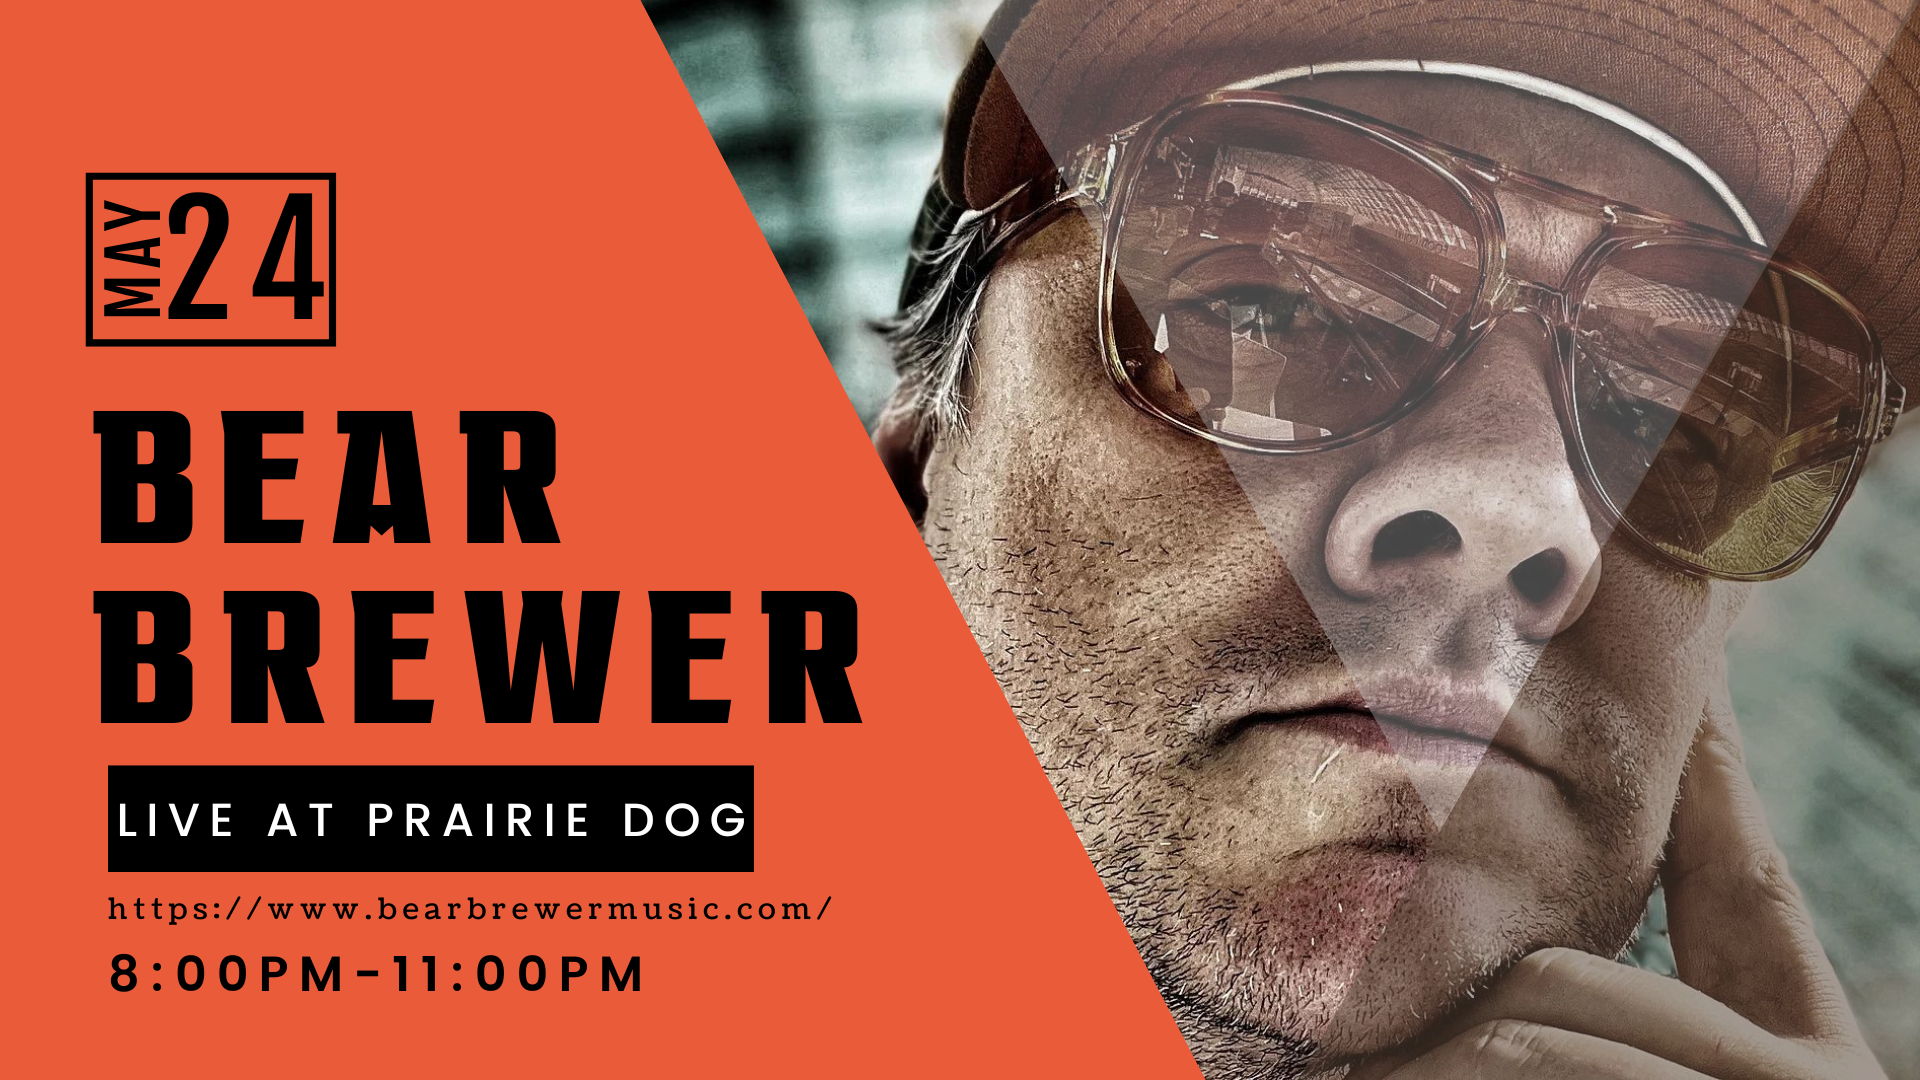 Bear Brewer rocks Prairie Dog's stage on May 24